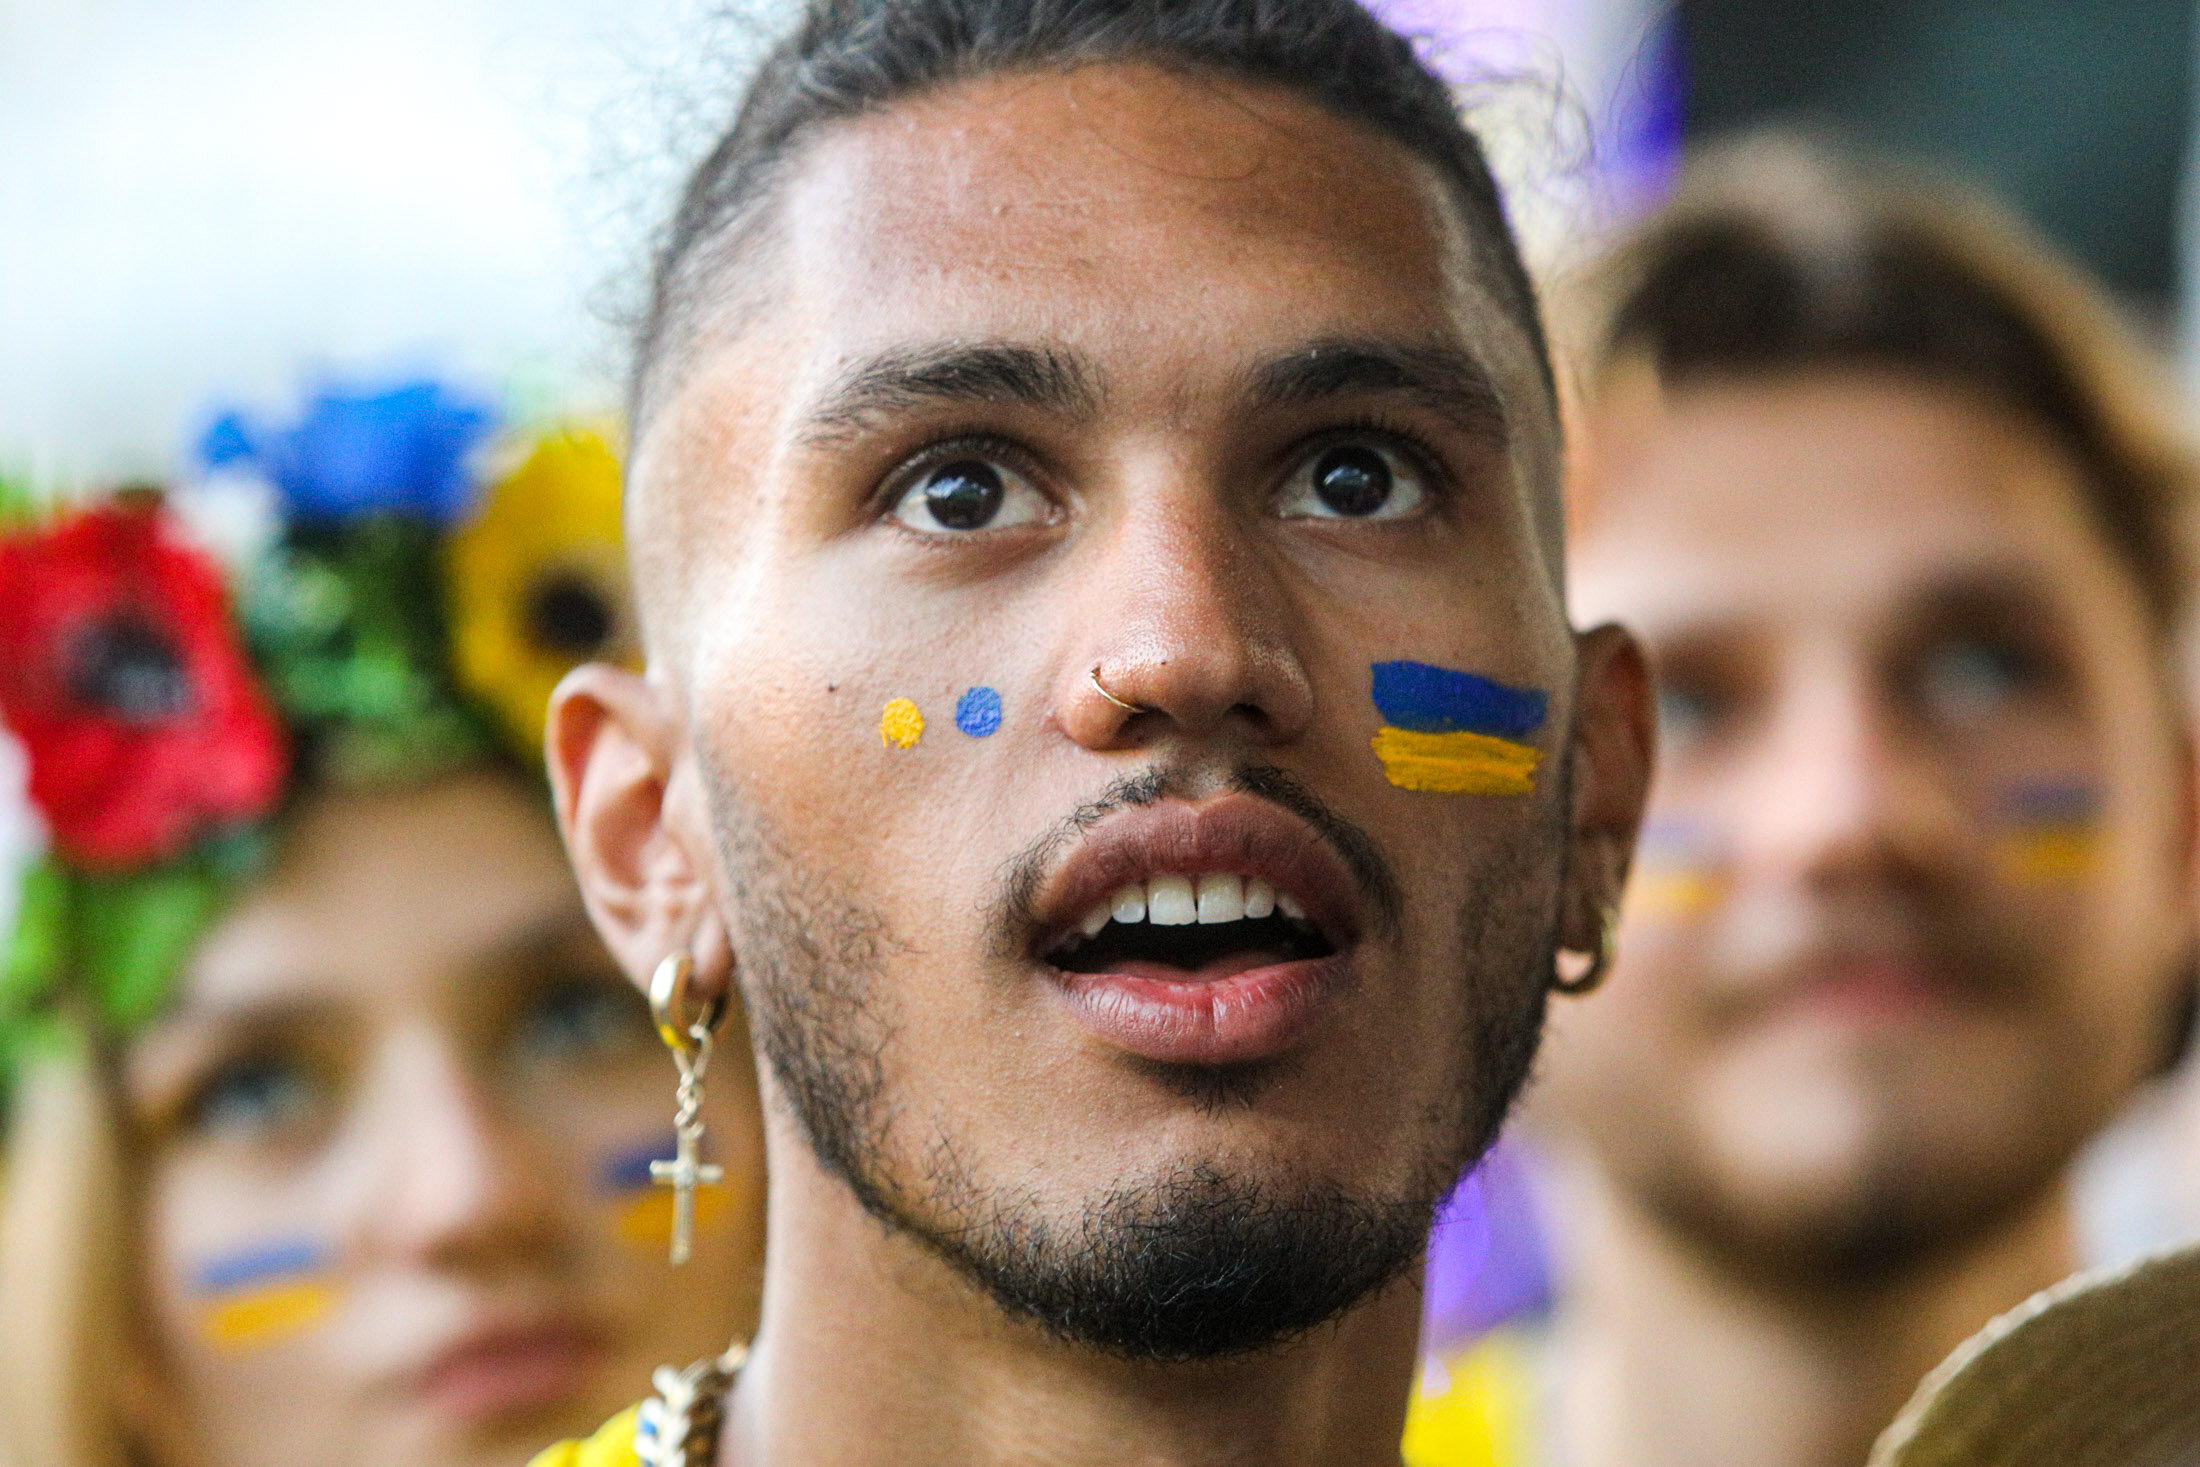 Ukrainian supporters  watch the  UEFA EURO 2020 Group C football match between Ukraine and Austria on a giant screen in the center of Kyiv on June 21, 2021.